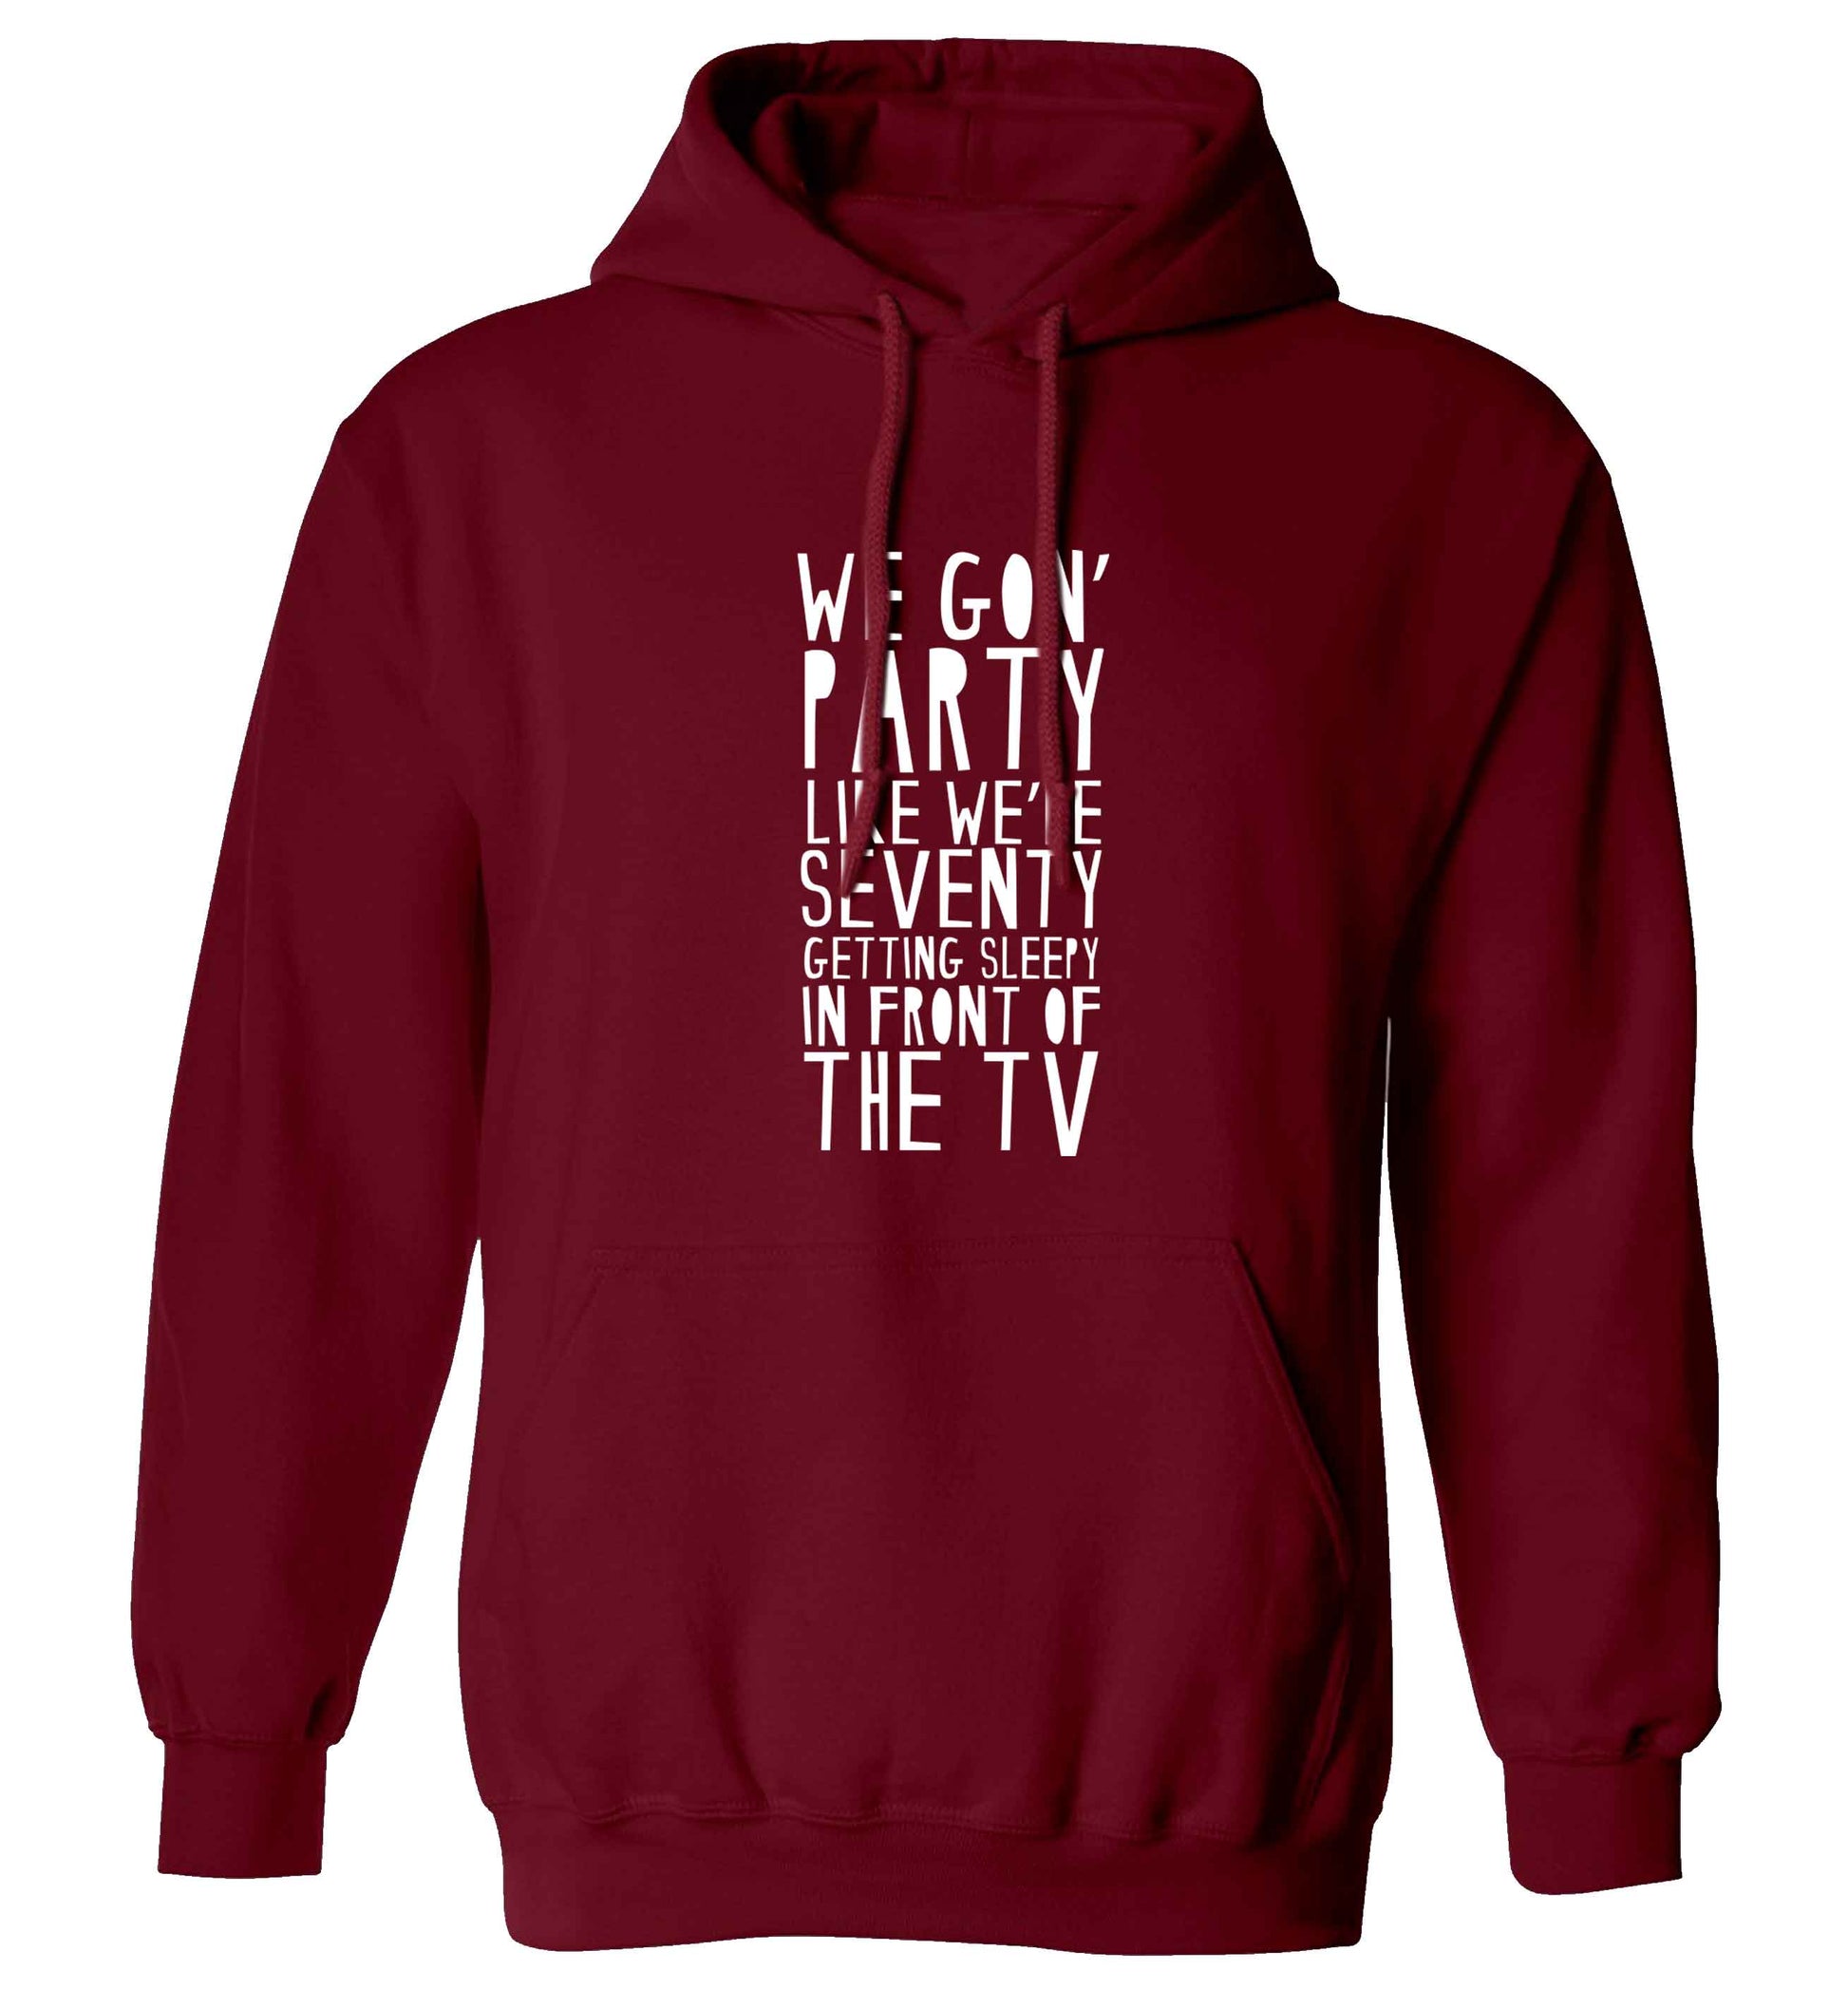 We gon' party like we're seventy getting sleepy in front of the TV adults unisex maroon hoodie 2XL